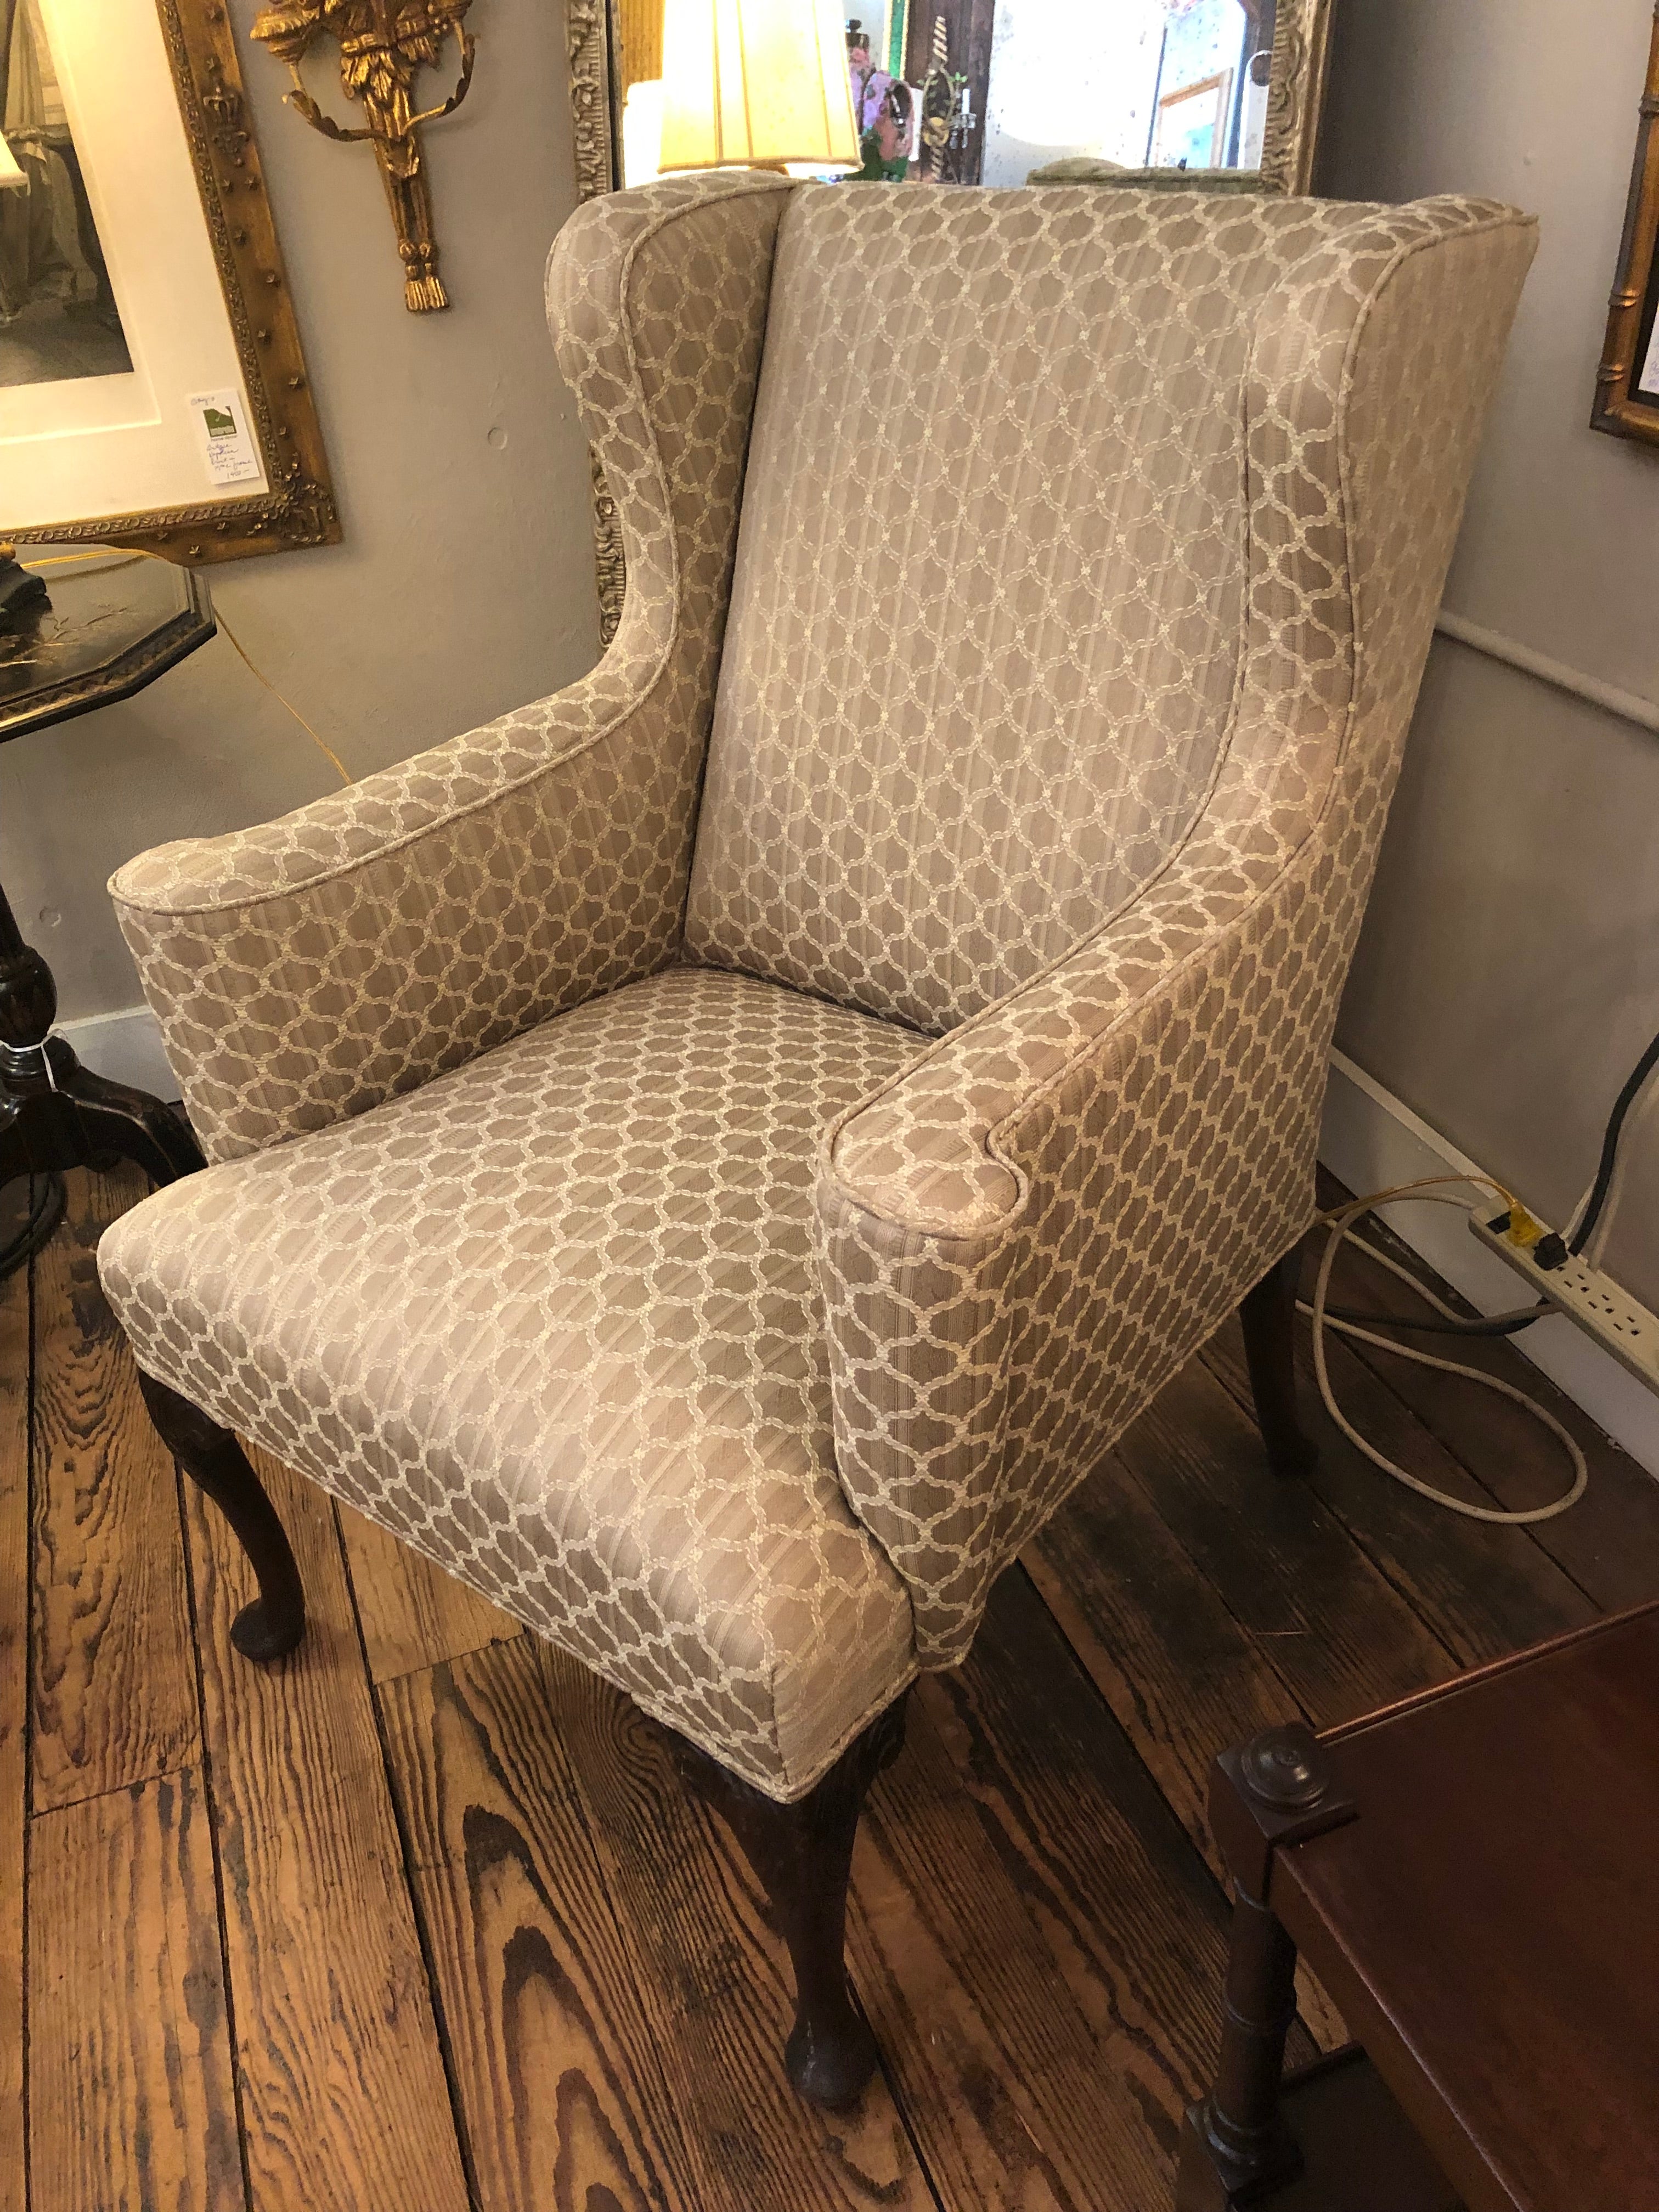 Classic wingback upholstered chair having neutral beige patterned fabric and beautiful carved walnut feet.
29.75 w arm to arm
26 w at the seat and top
arm height 27.